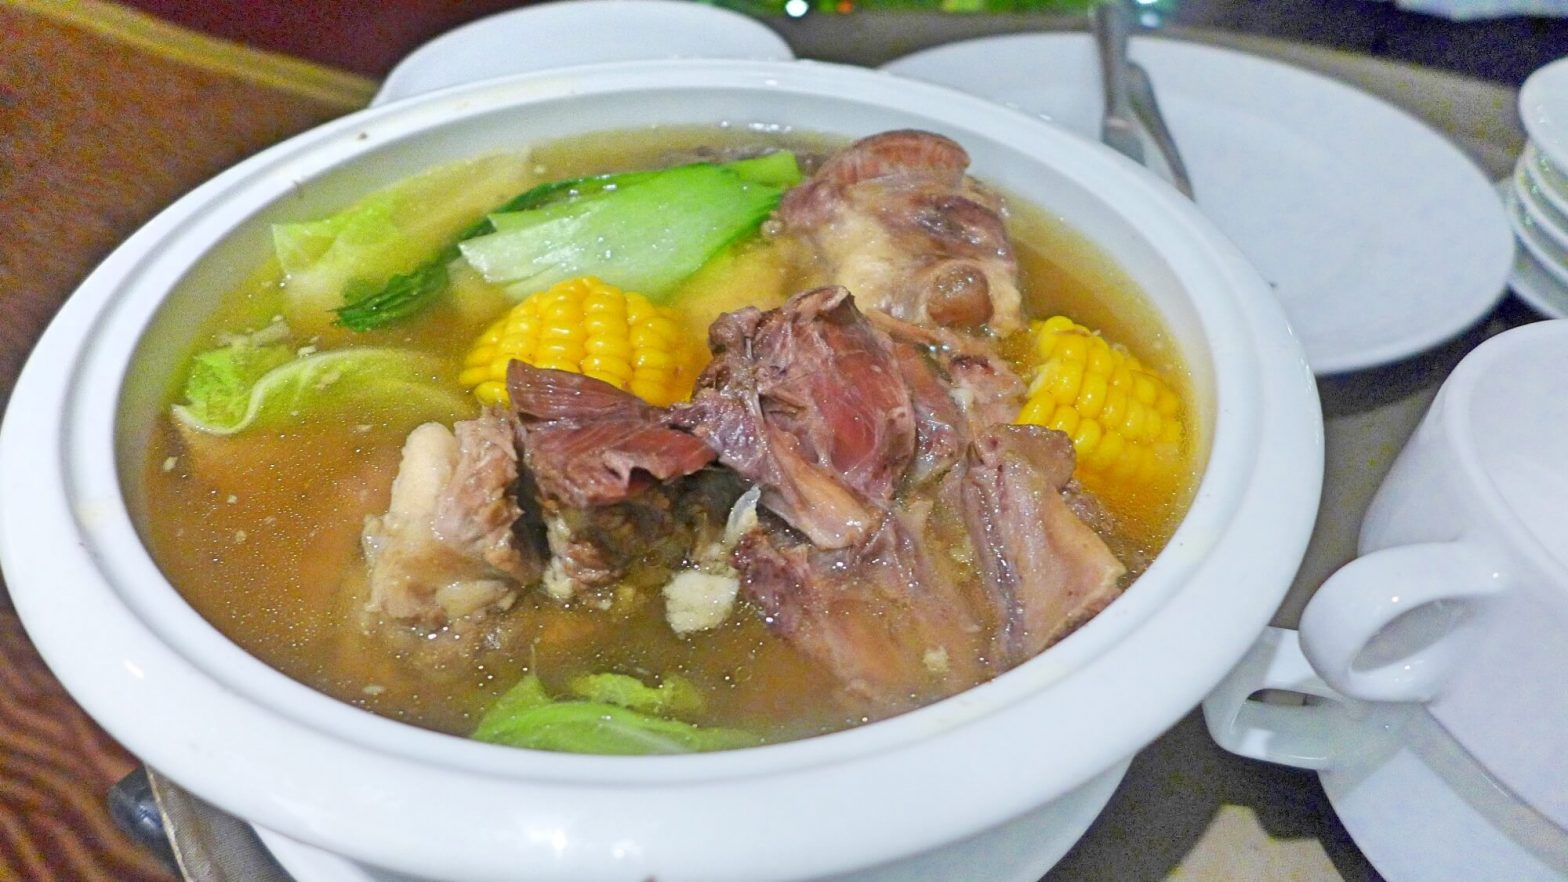 Marco Polo Plaza Cebu marks Independencia with rich Luzon cuisine